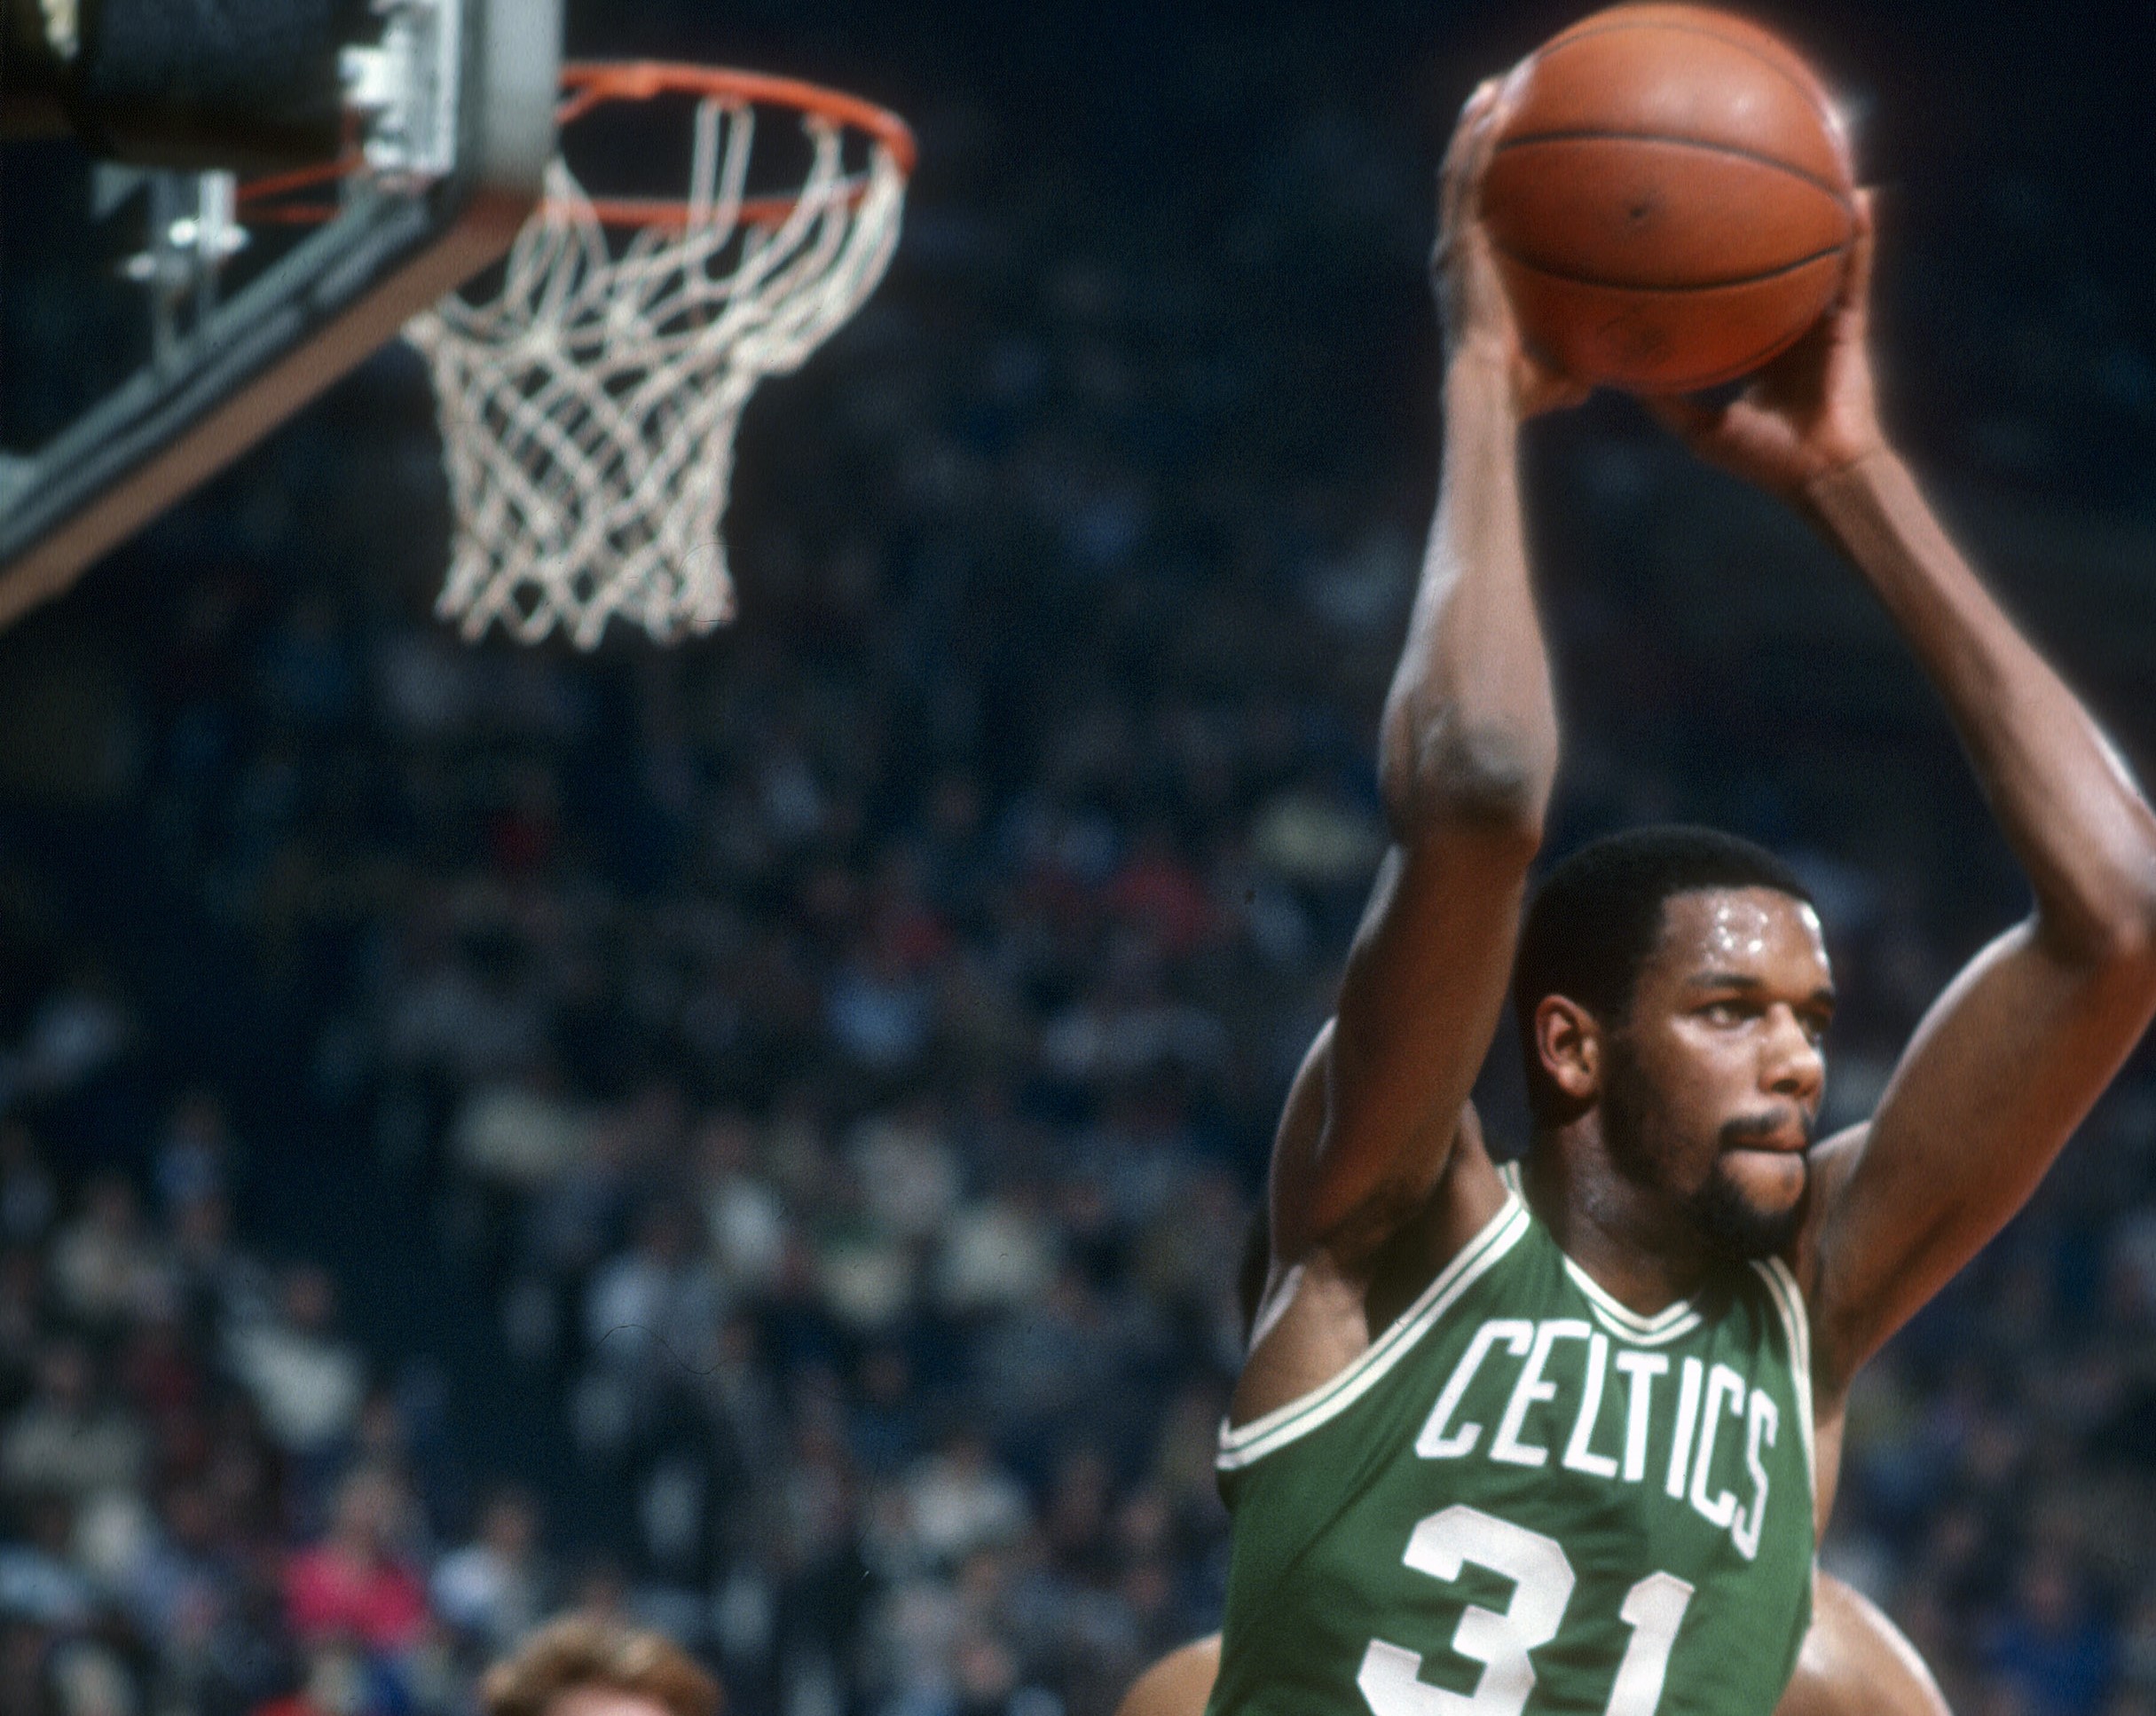 Cedric Maxwell of the Boston Celtics looks to pass against the Washington Bullets.